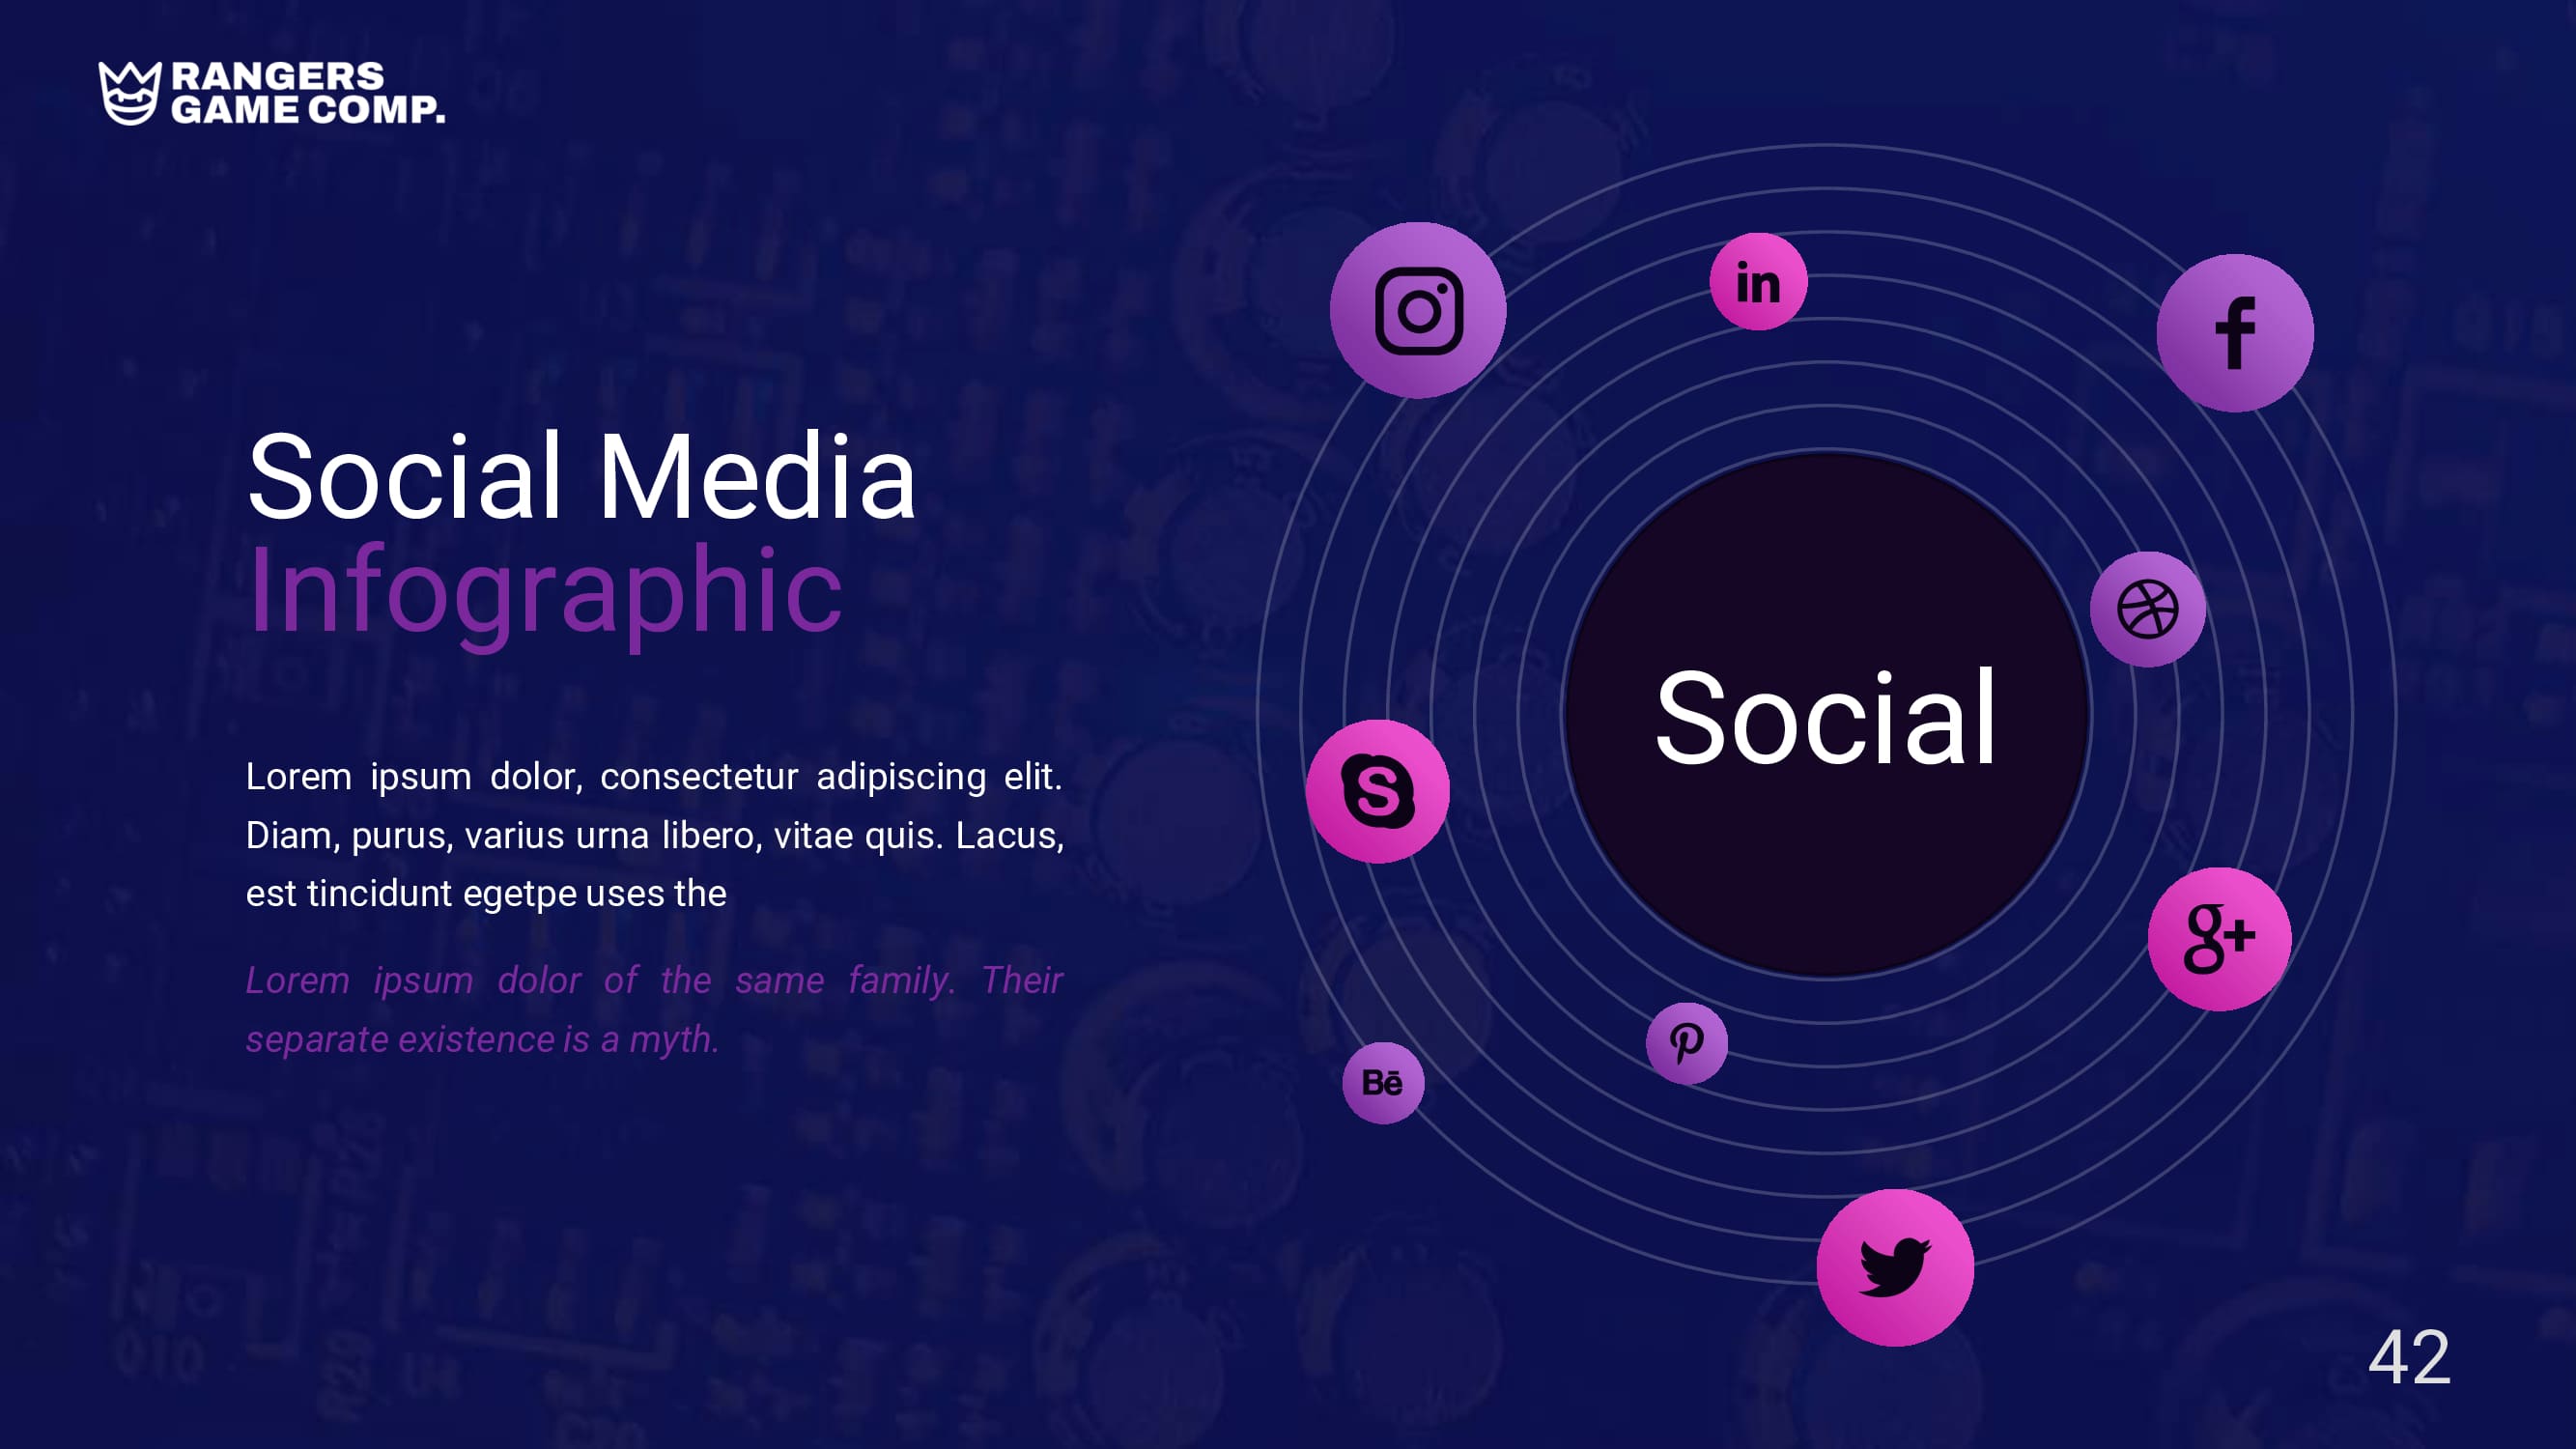 Social media infographic slide with neon elements.